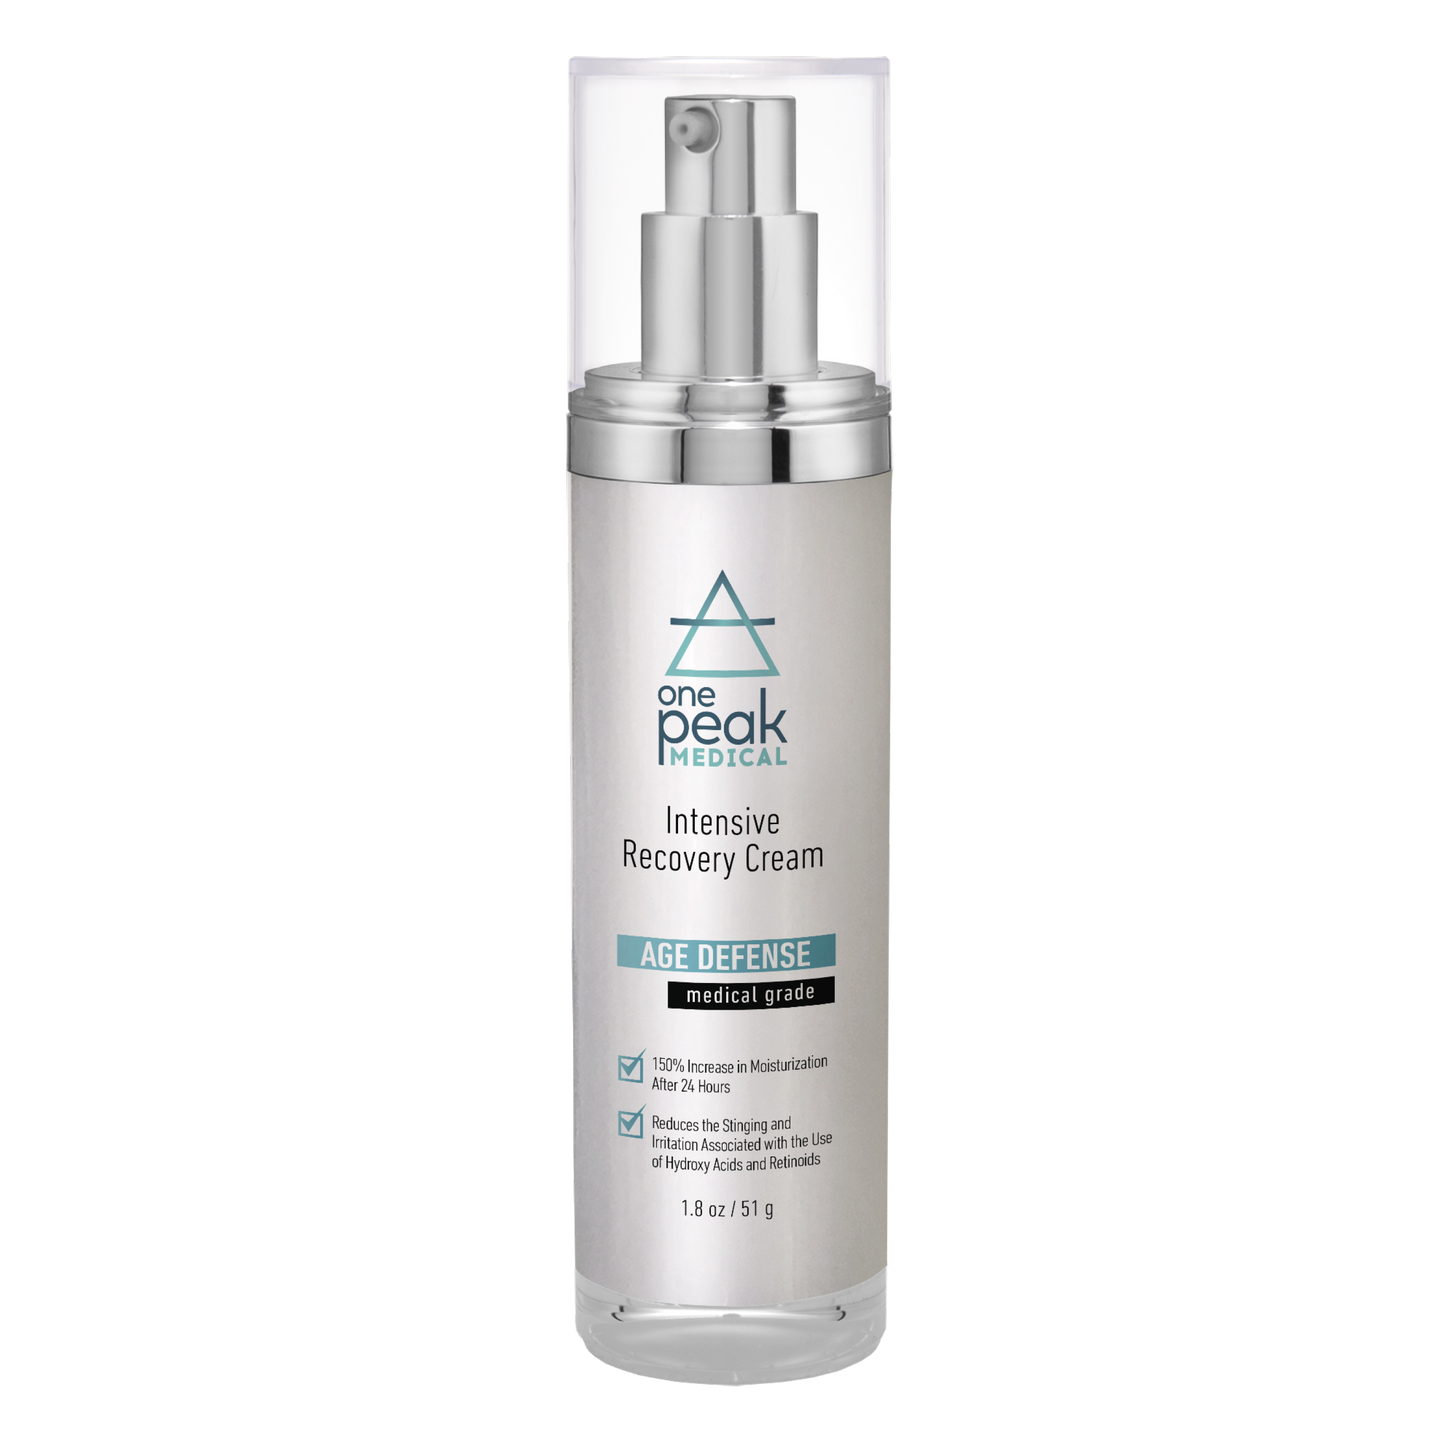 OnePeak Medical - Intensive Recovery Cream skincare bottle